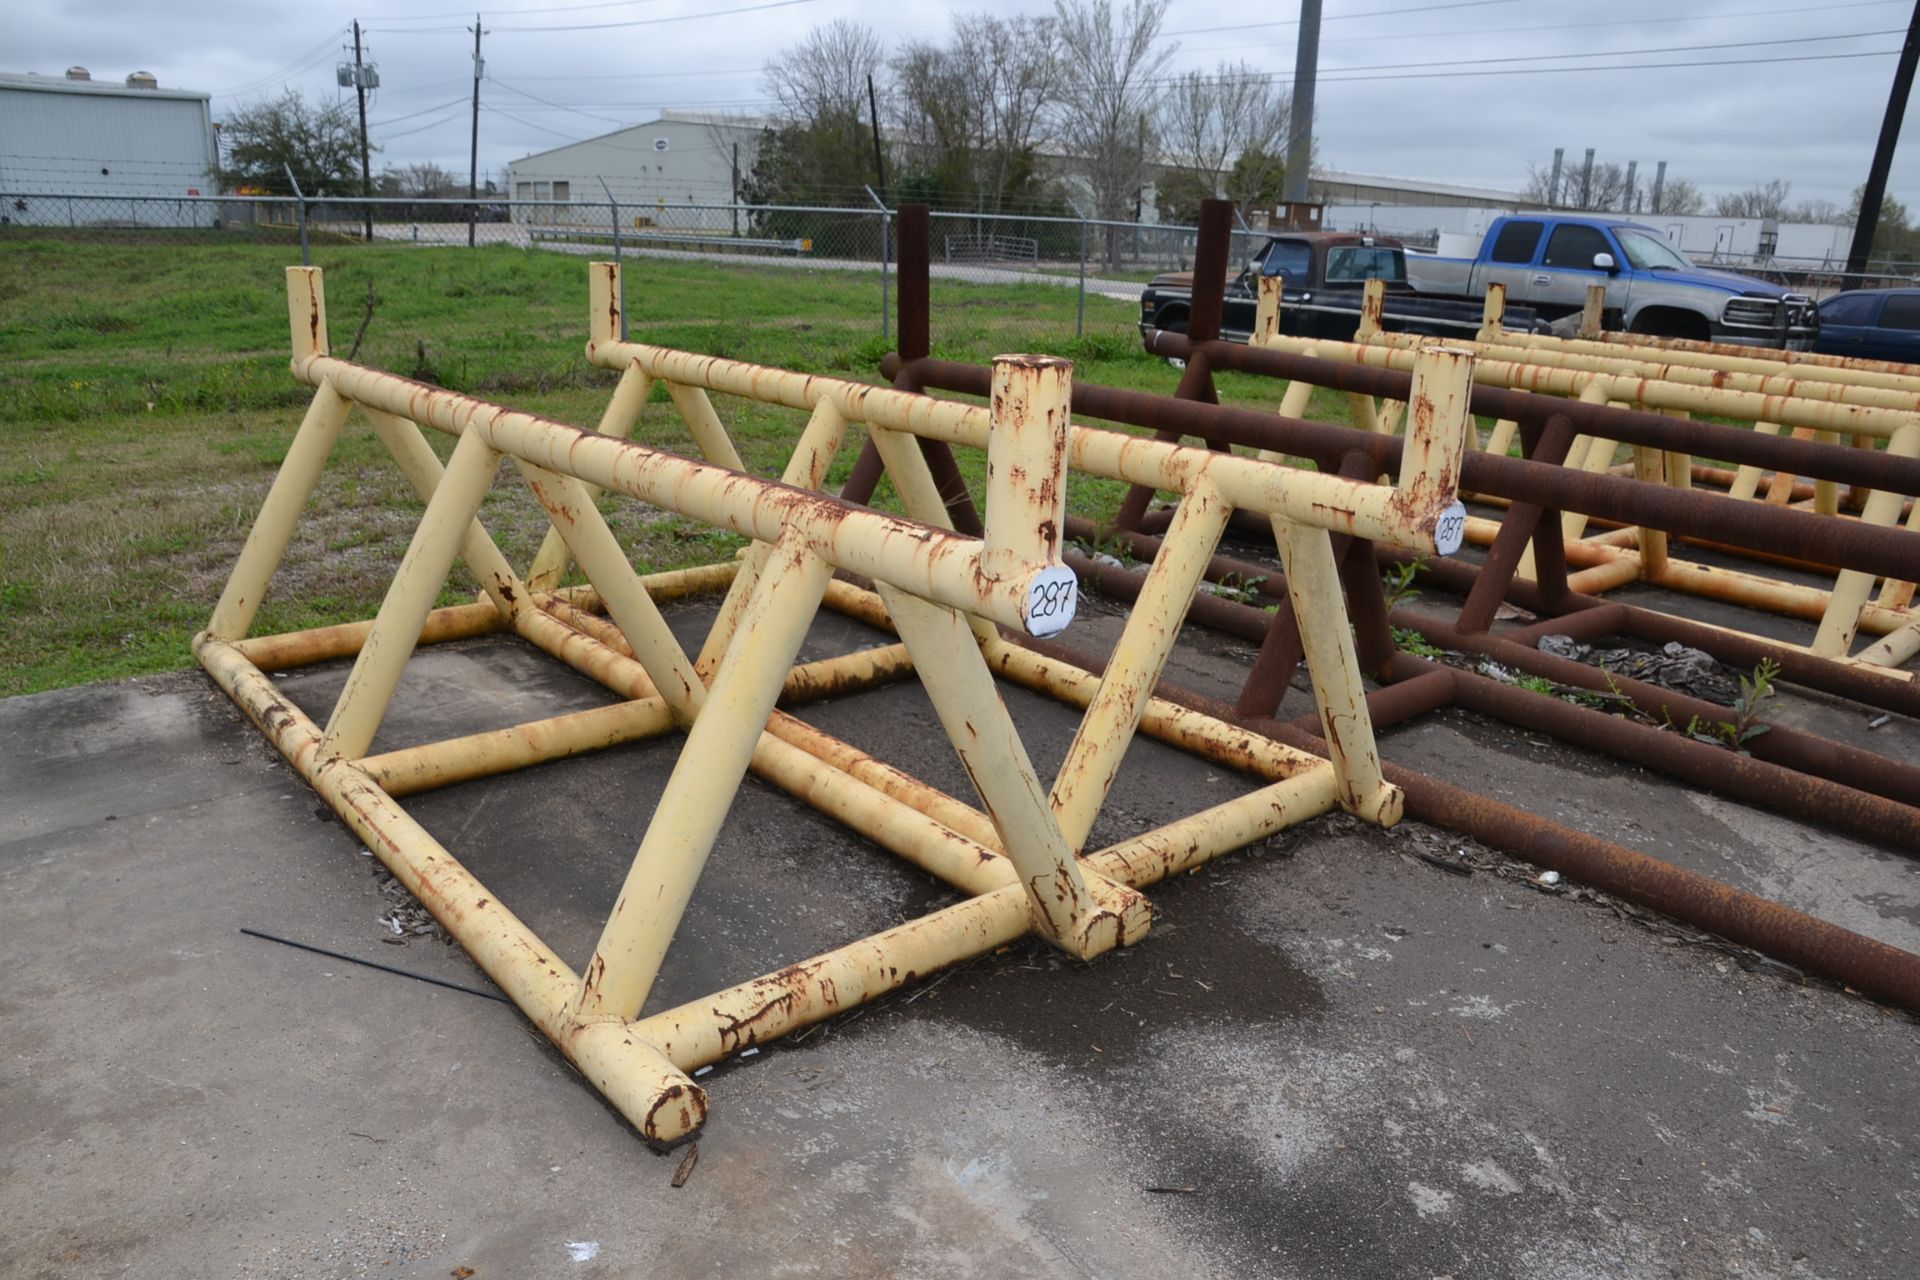 LOT (2) PIPE RACKS, 12 FOOT NO MATERIAL (PIPE TUBING INCLUDED) (LOCATION: 2622 Martinville Dr,